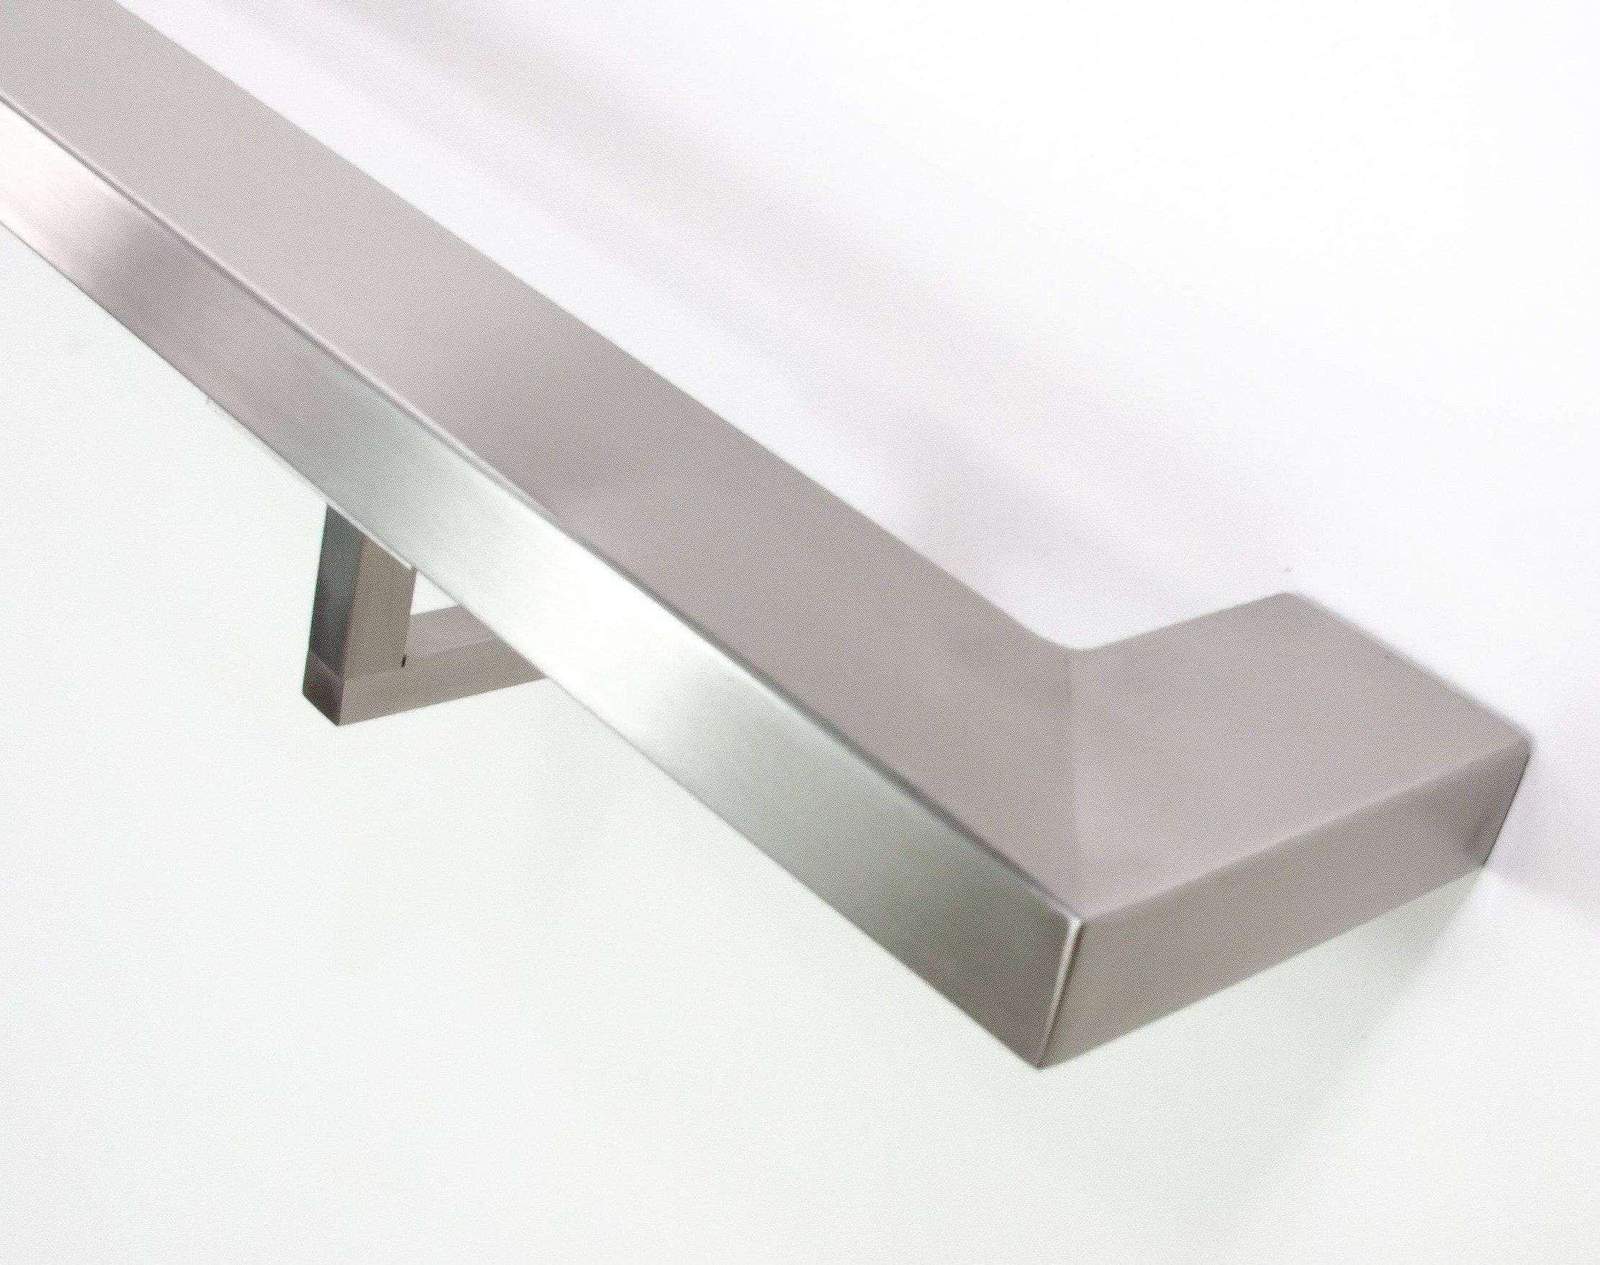 Stainless steel brushed nickel rectangle ADA handrail – 72 in 6ft